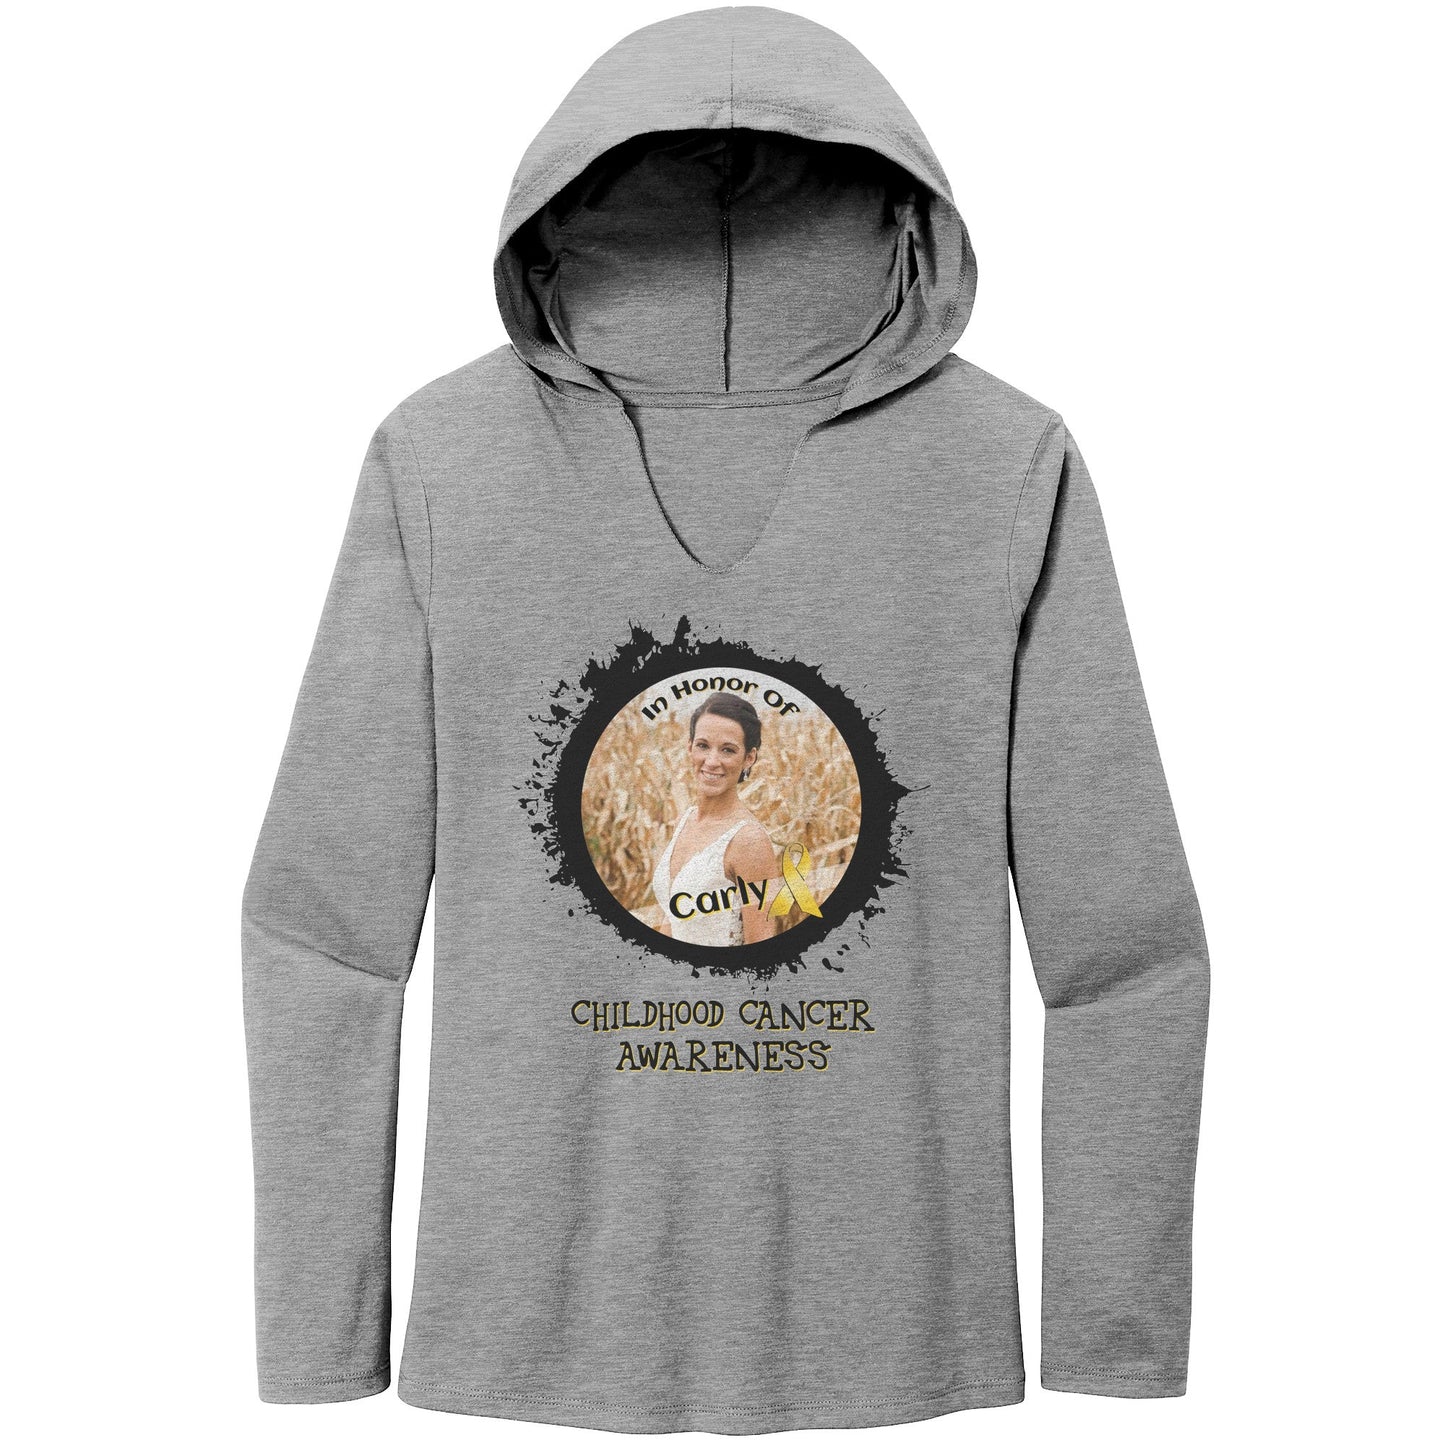 In Memory / In Honor of Childhood Cancer Awareness T-Shirt, Hoodie, Tank |x|